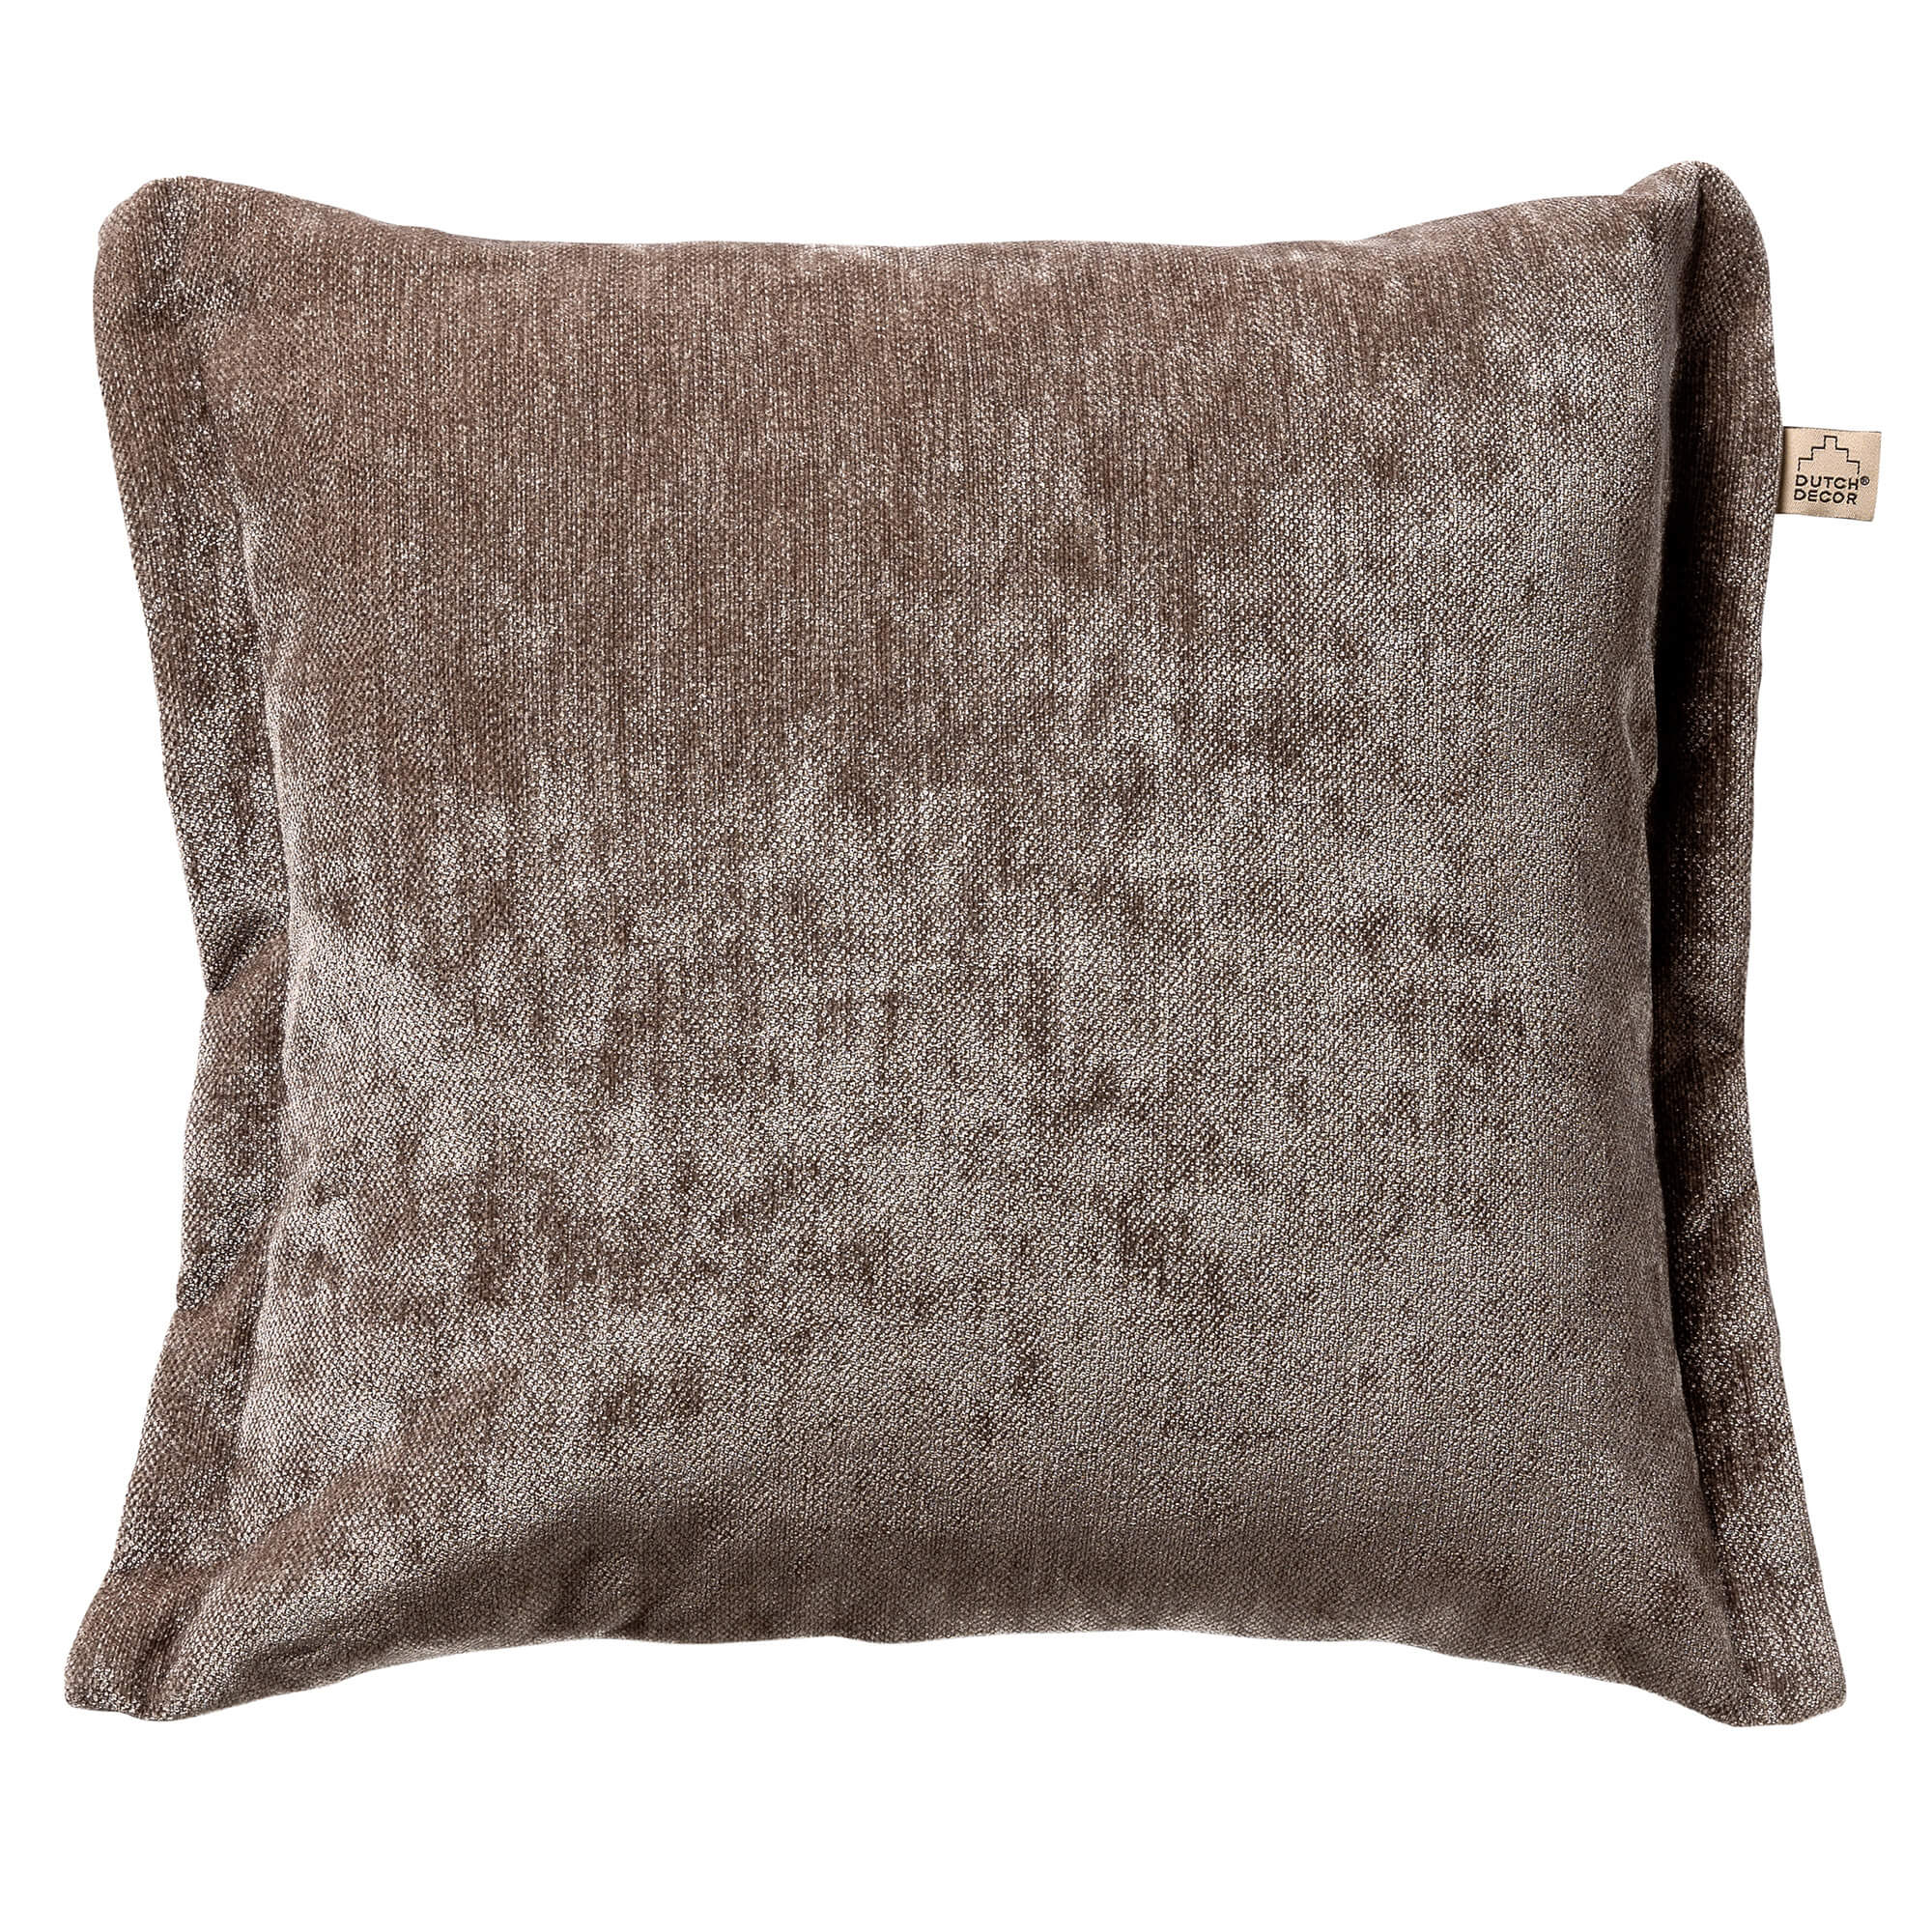 LEWIS - Cushion cover 45x45 cm - Driftwood - taupe